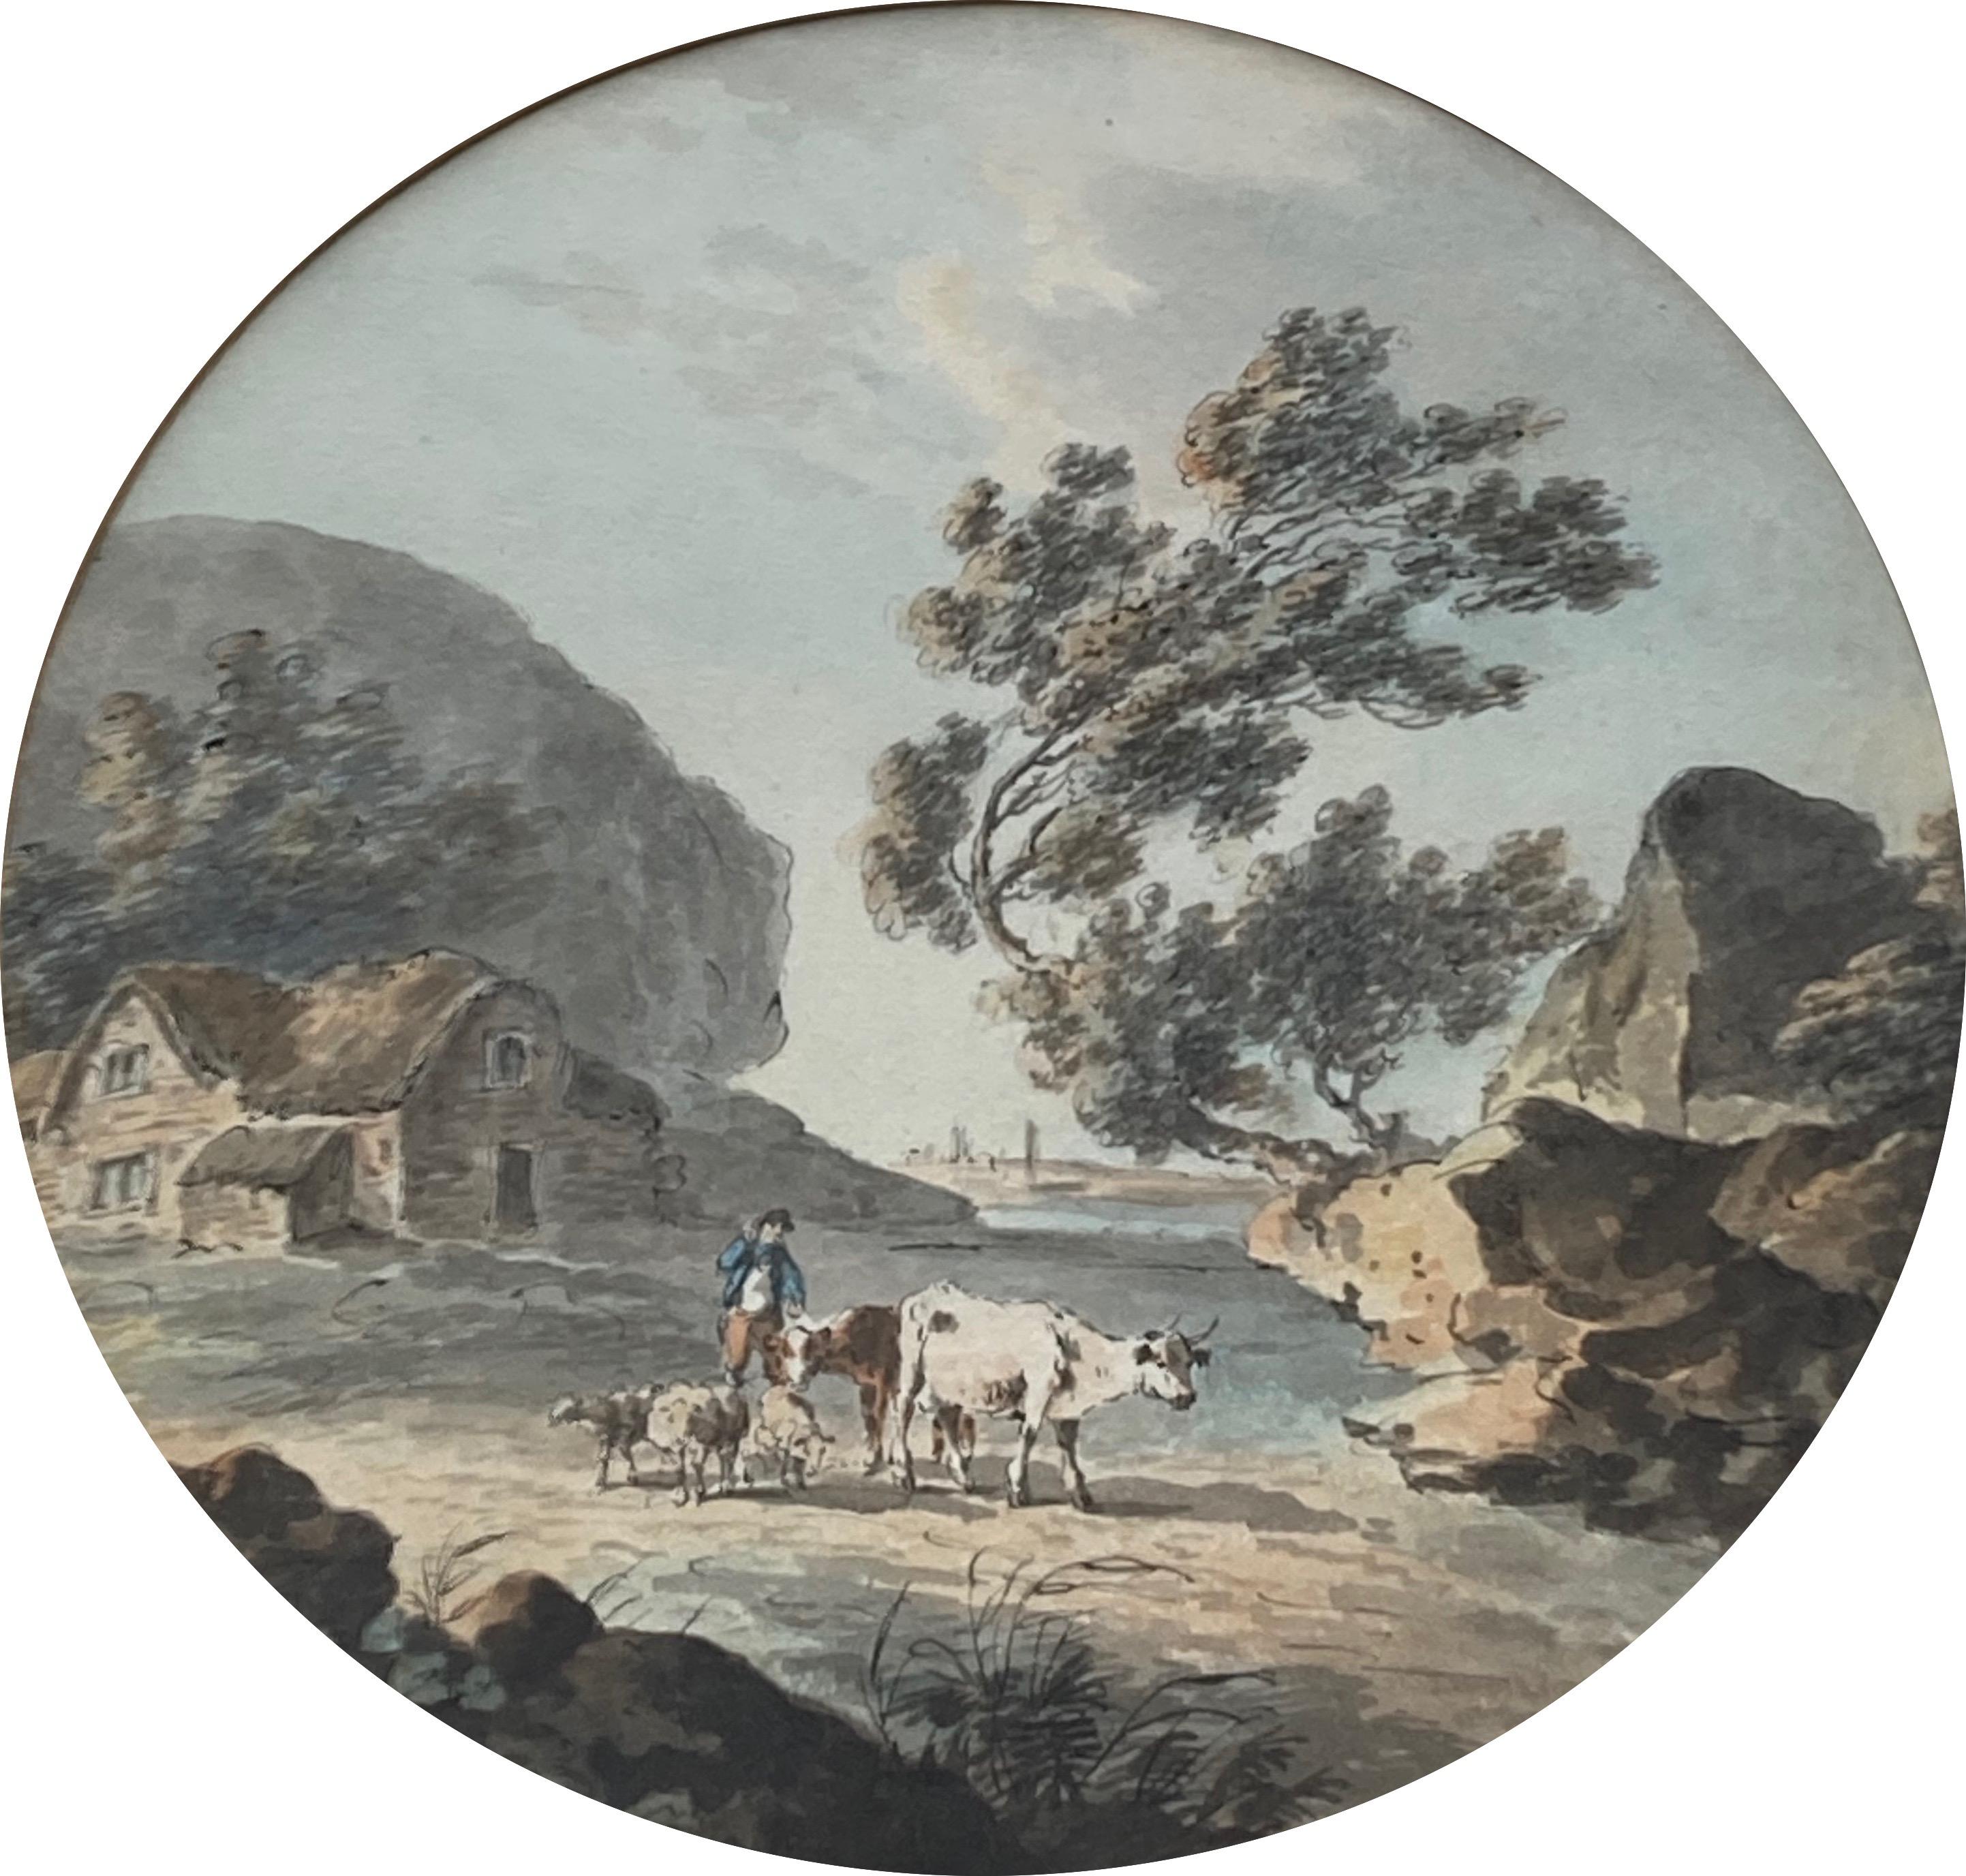 Early English watercolour, Figures and cattle by a river - Art by William Payne